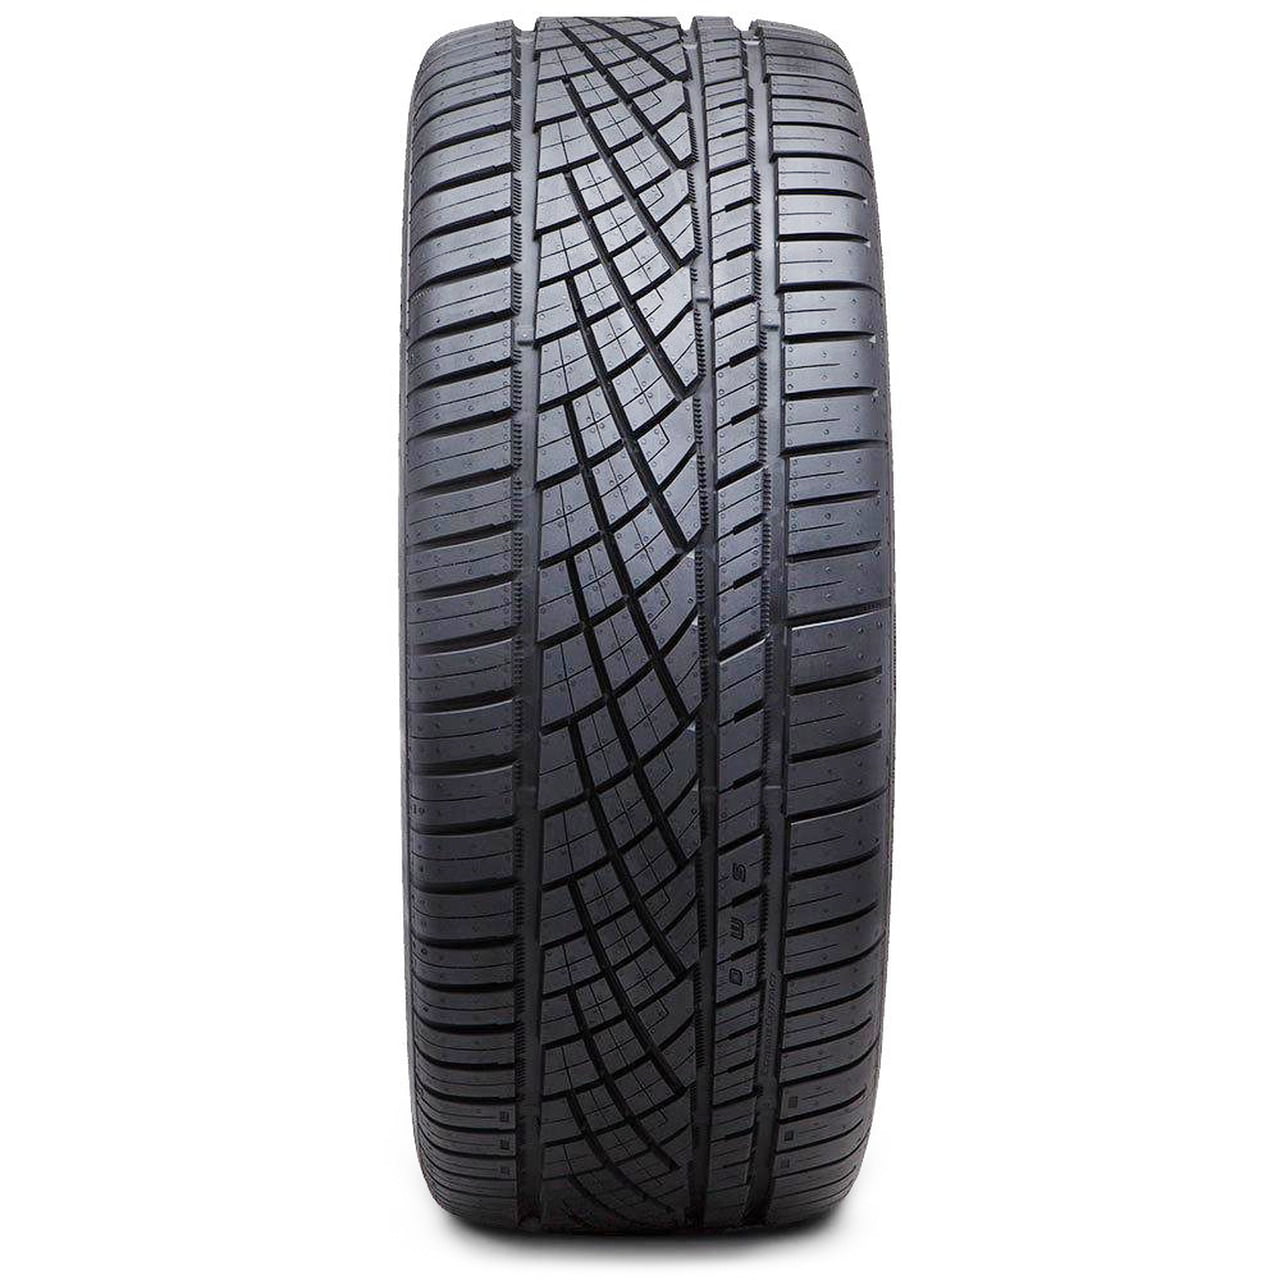 Continental ExtremeContact DWS06 255/35R18 94 Y Tire